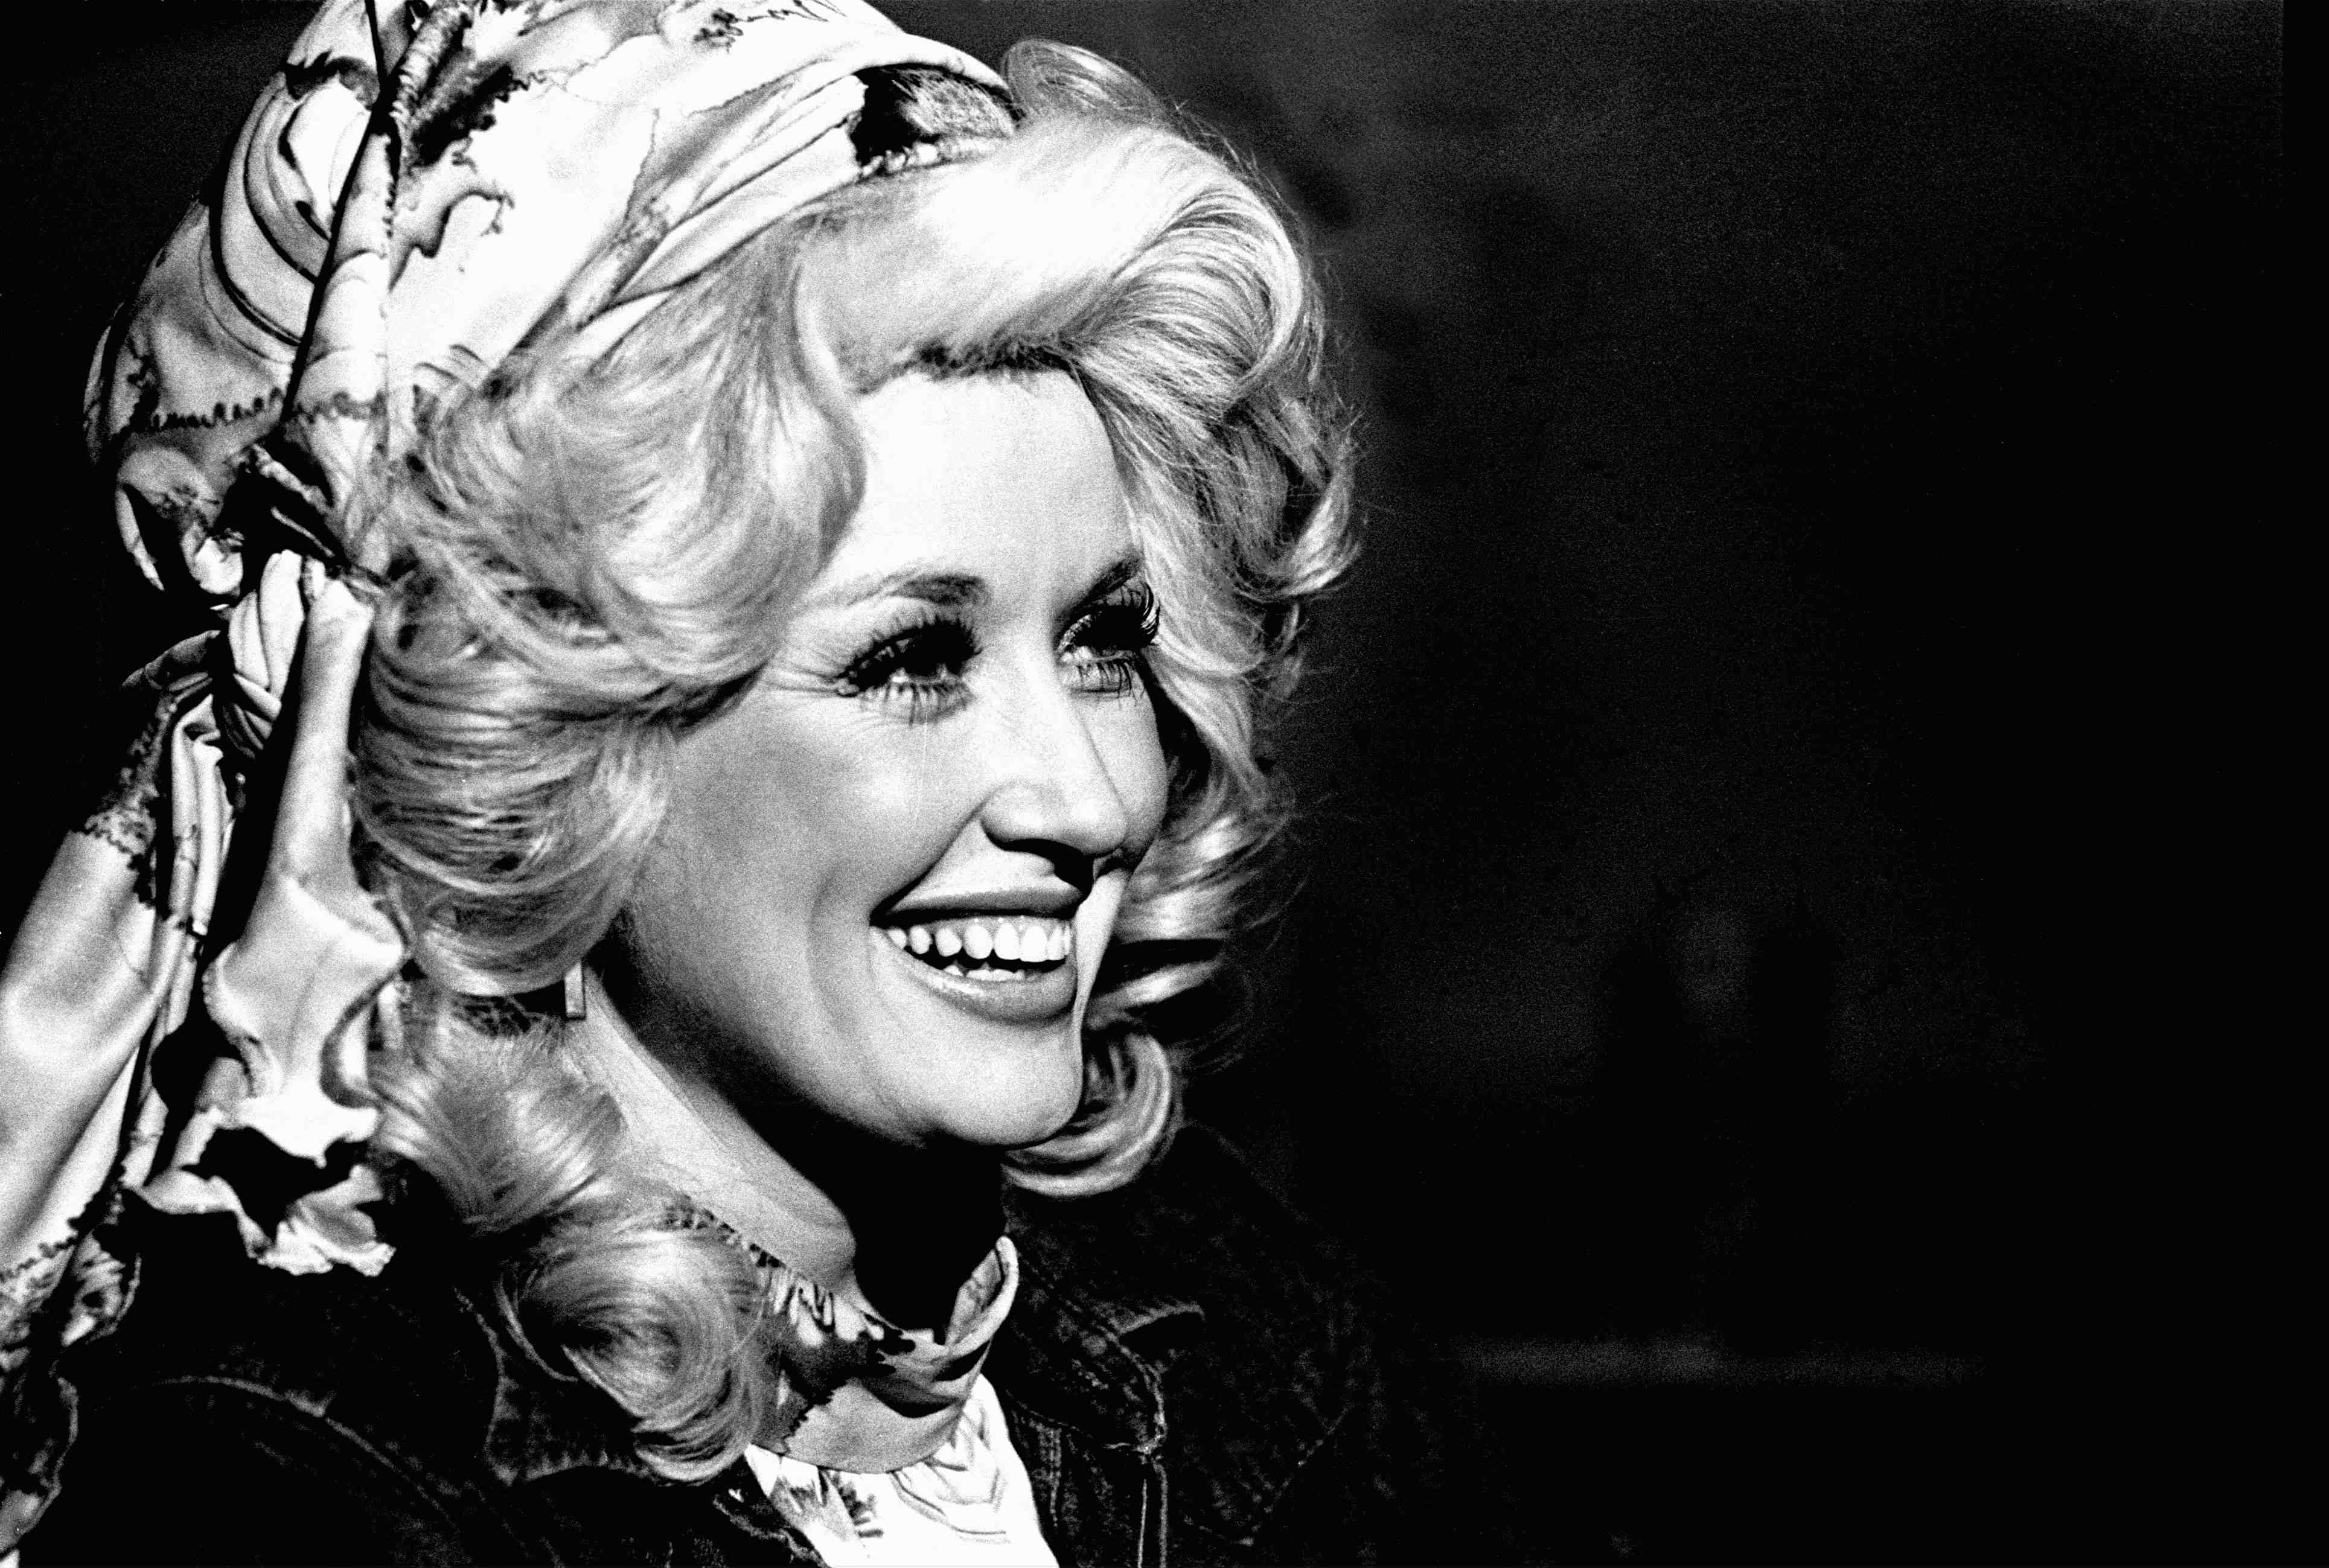 Dolly Parton in a bandana in black and white.